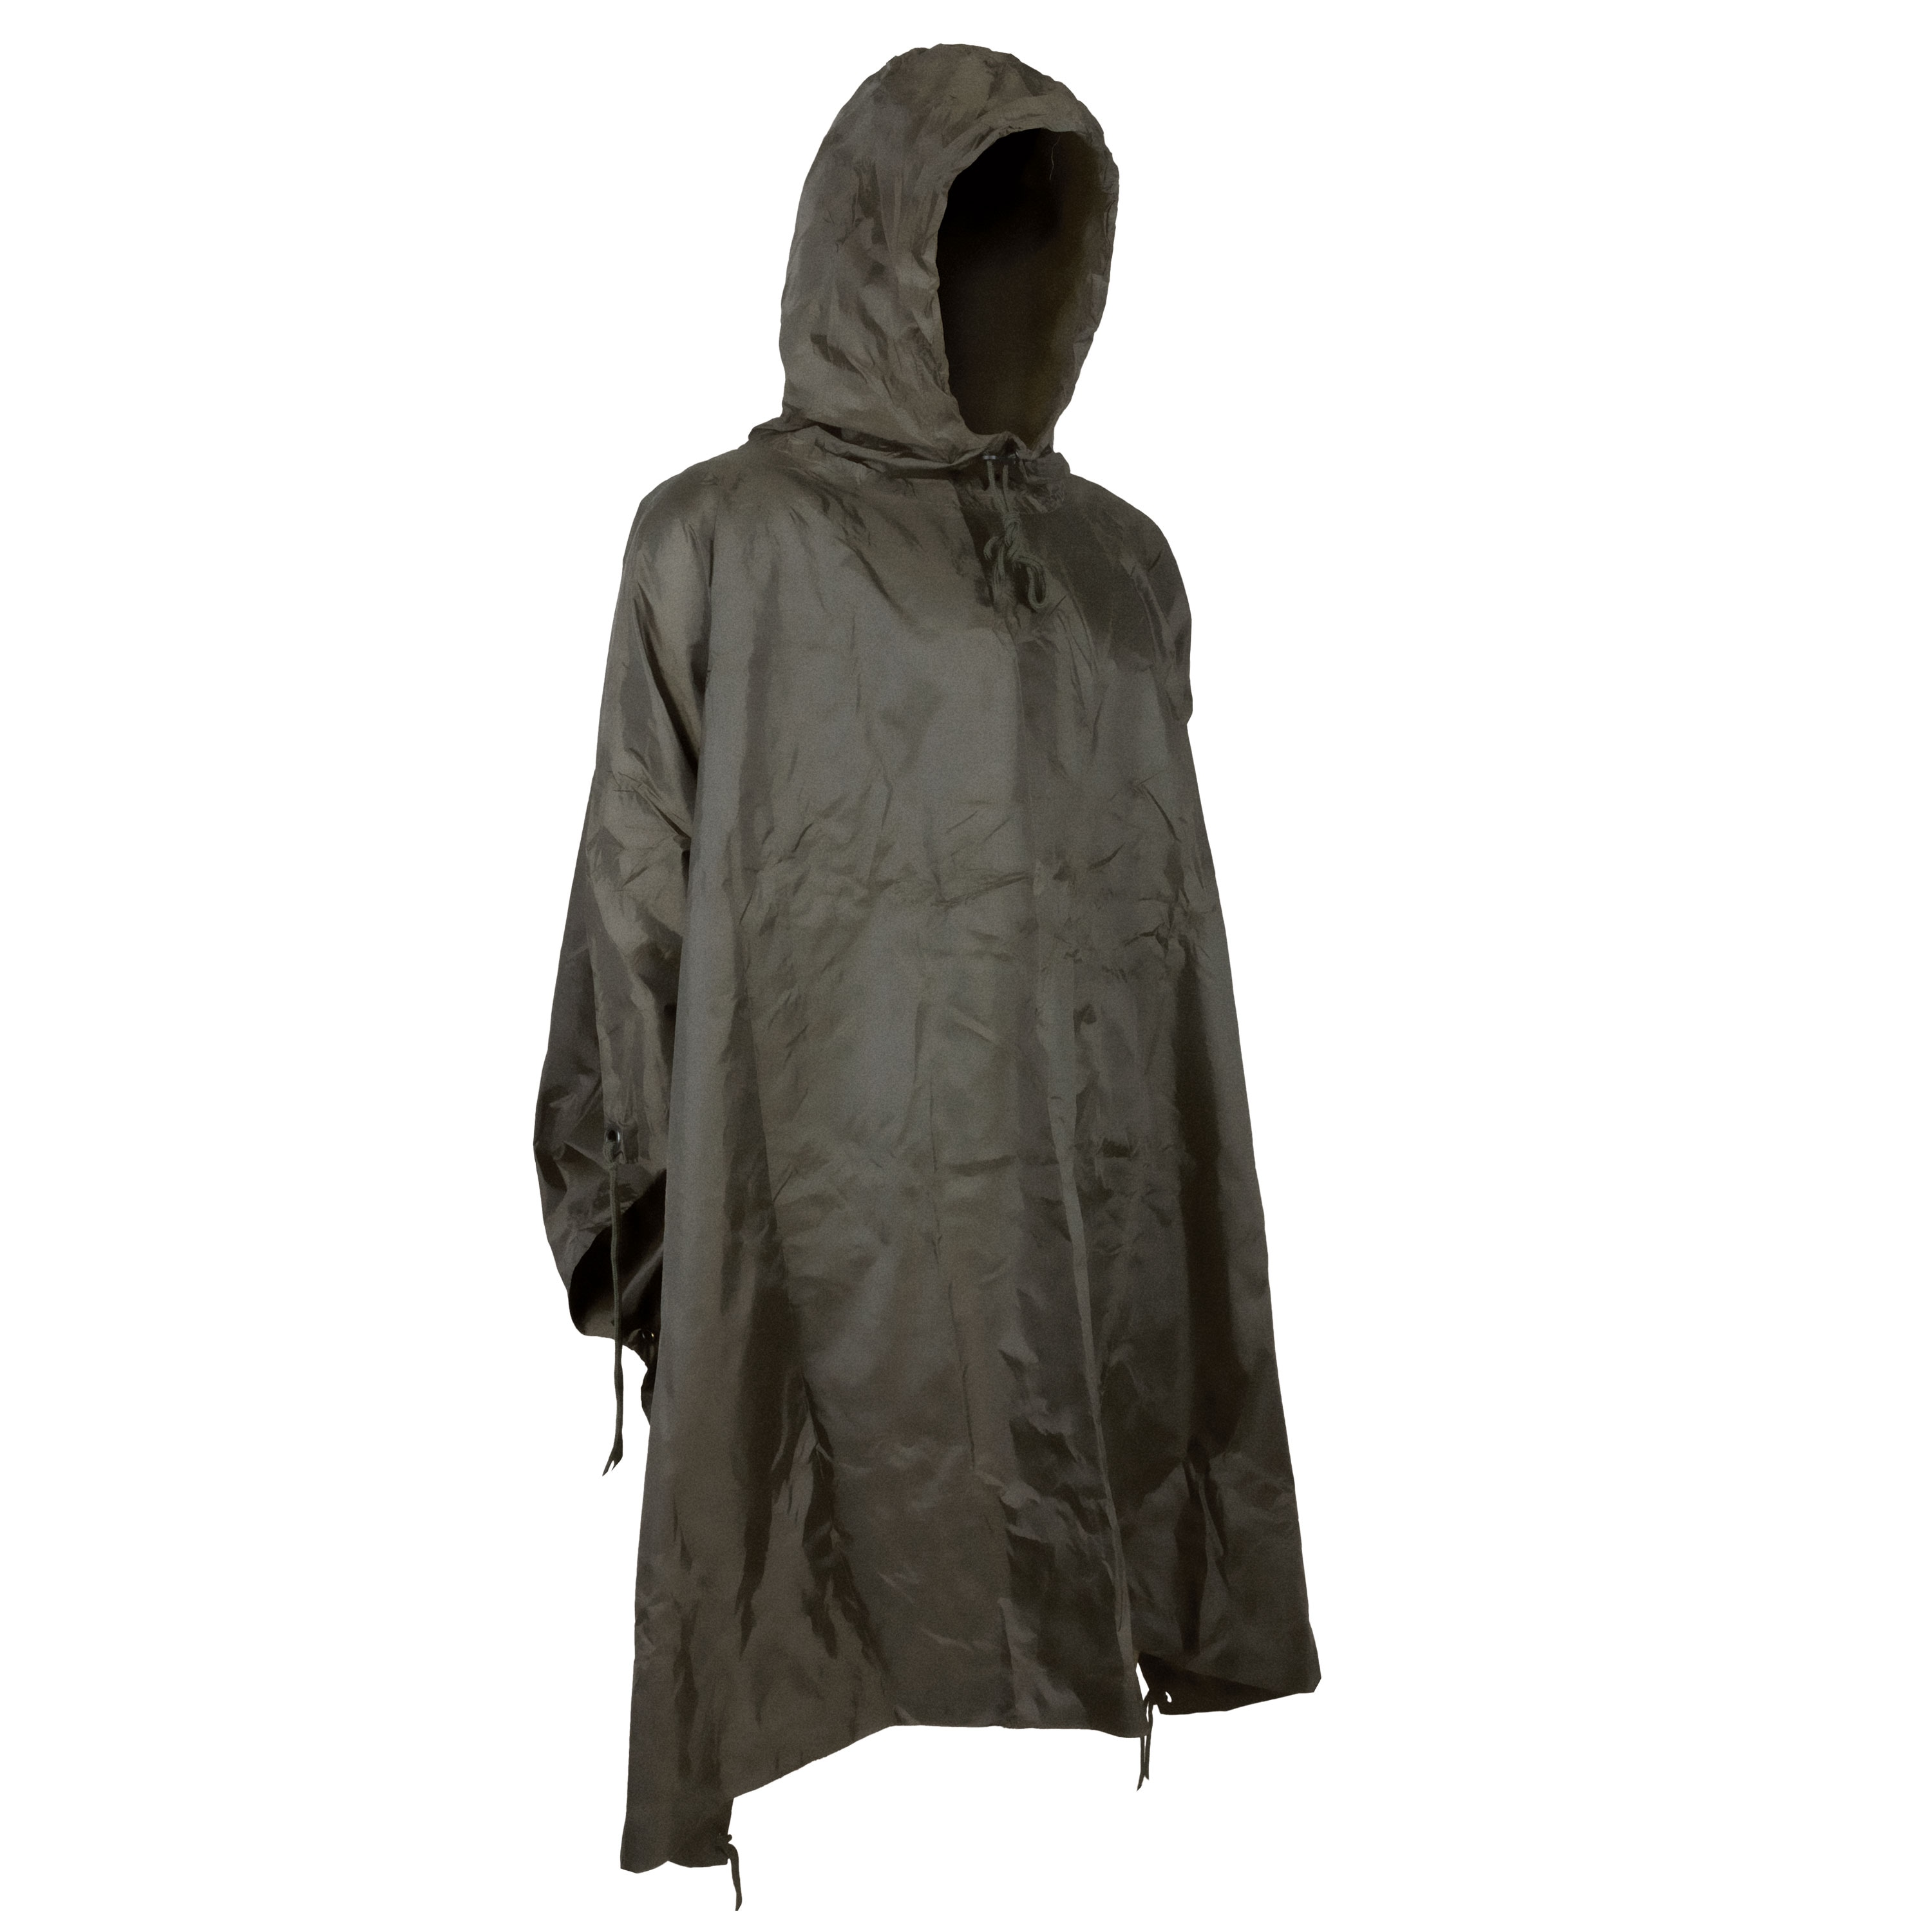 weer boog Stimulans Purchase the U.S. Style Rain Poncho olive green by ASMC